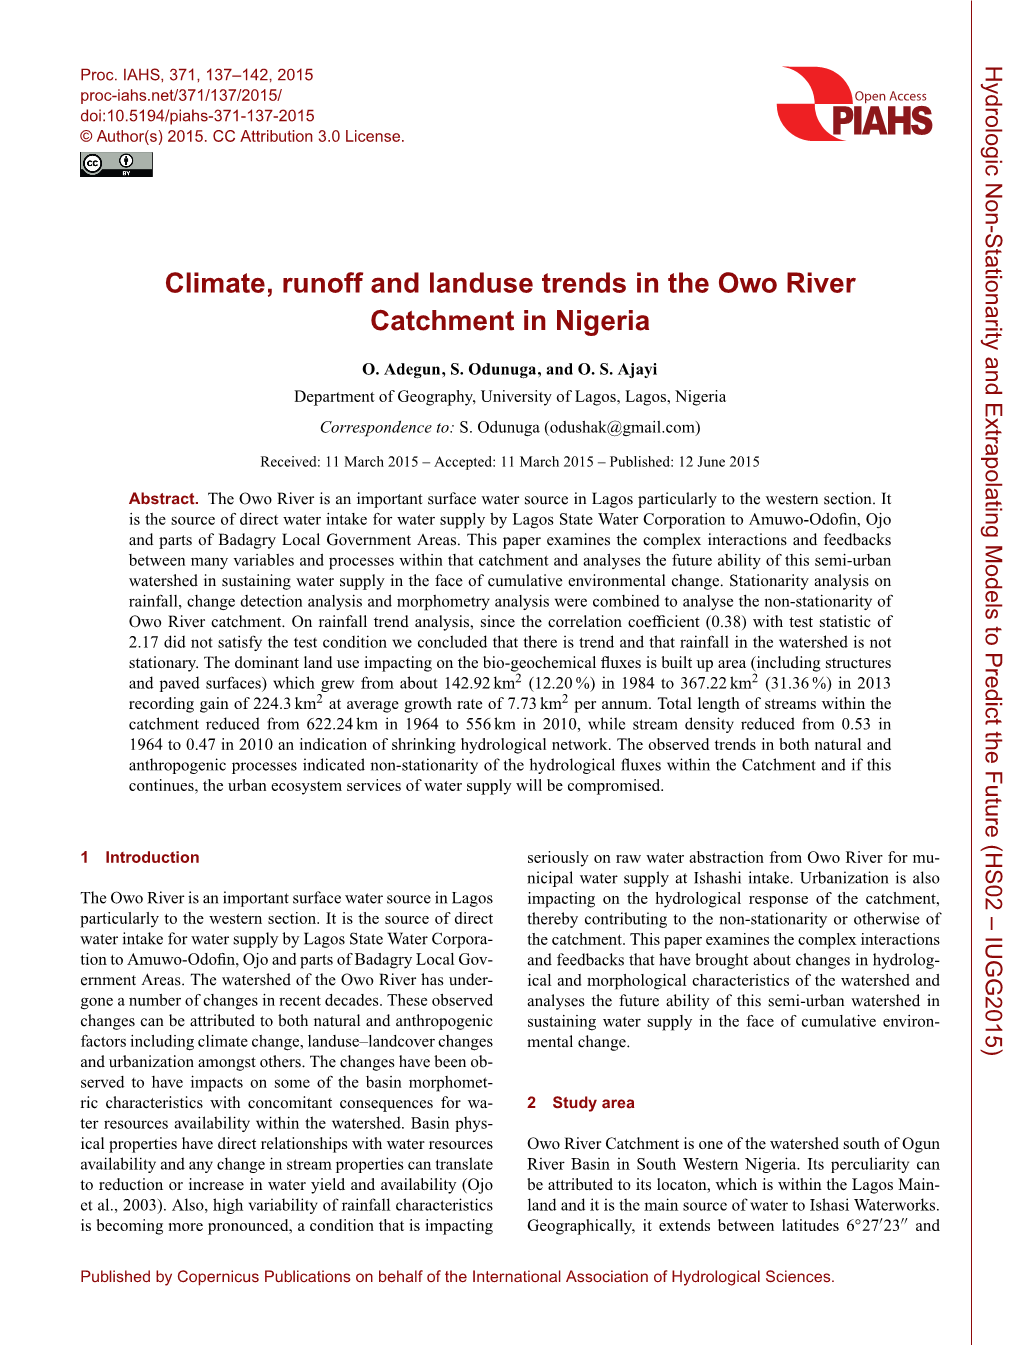 Climate, Runoff and Landuse Trends in the Owo River Catchment in Nigeria